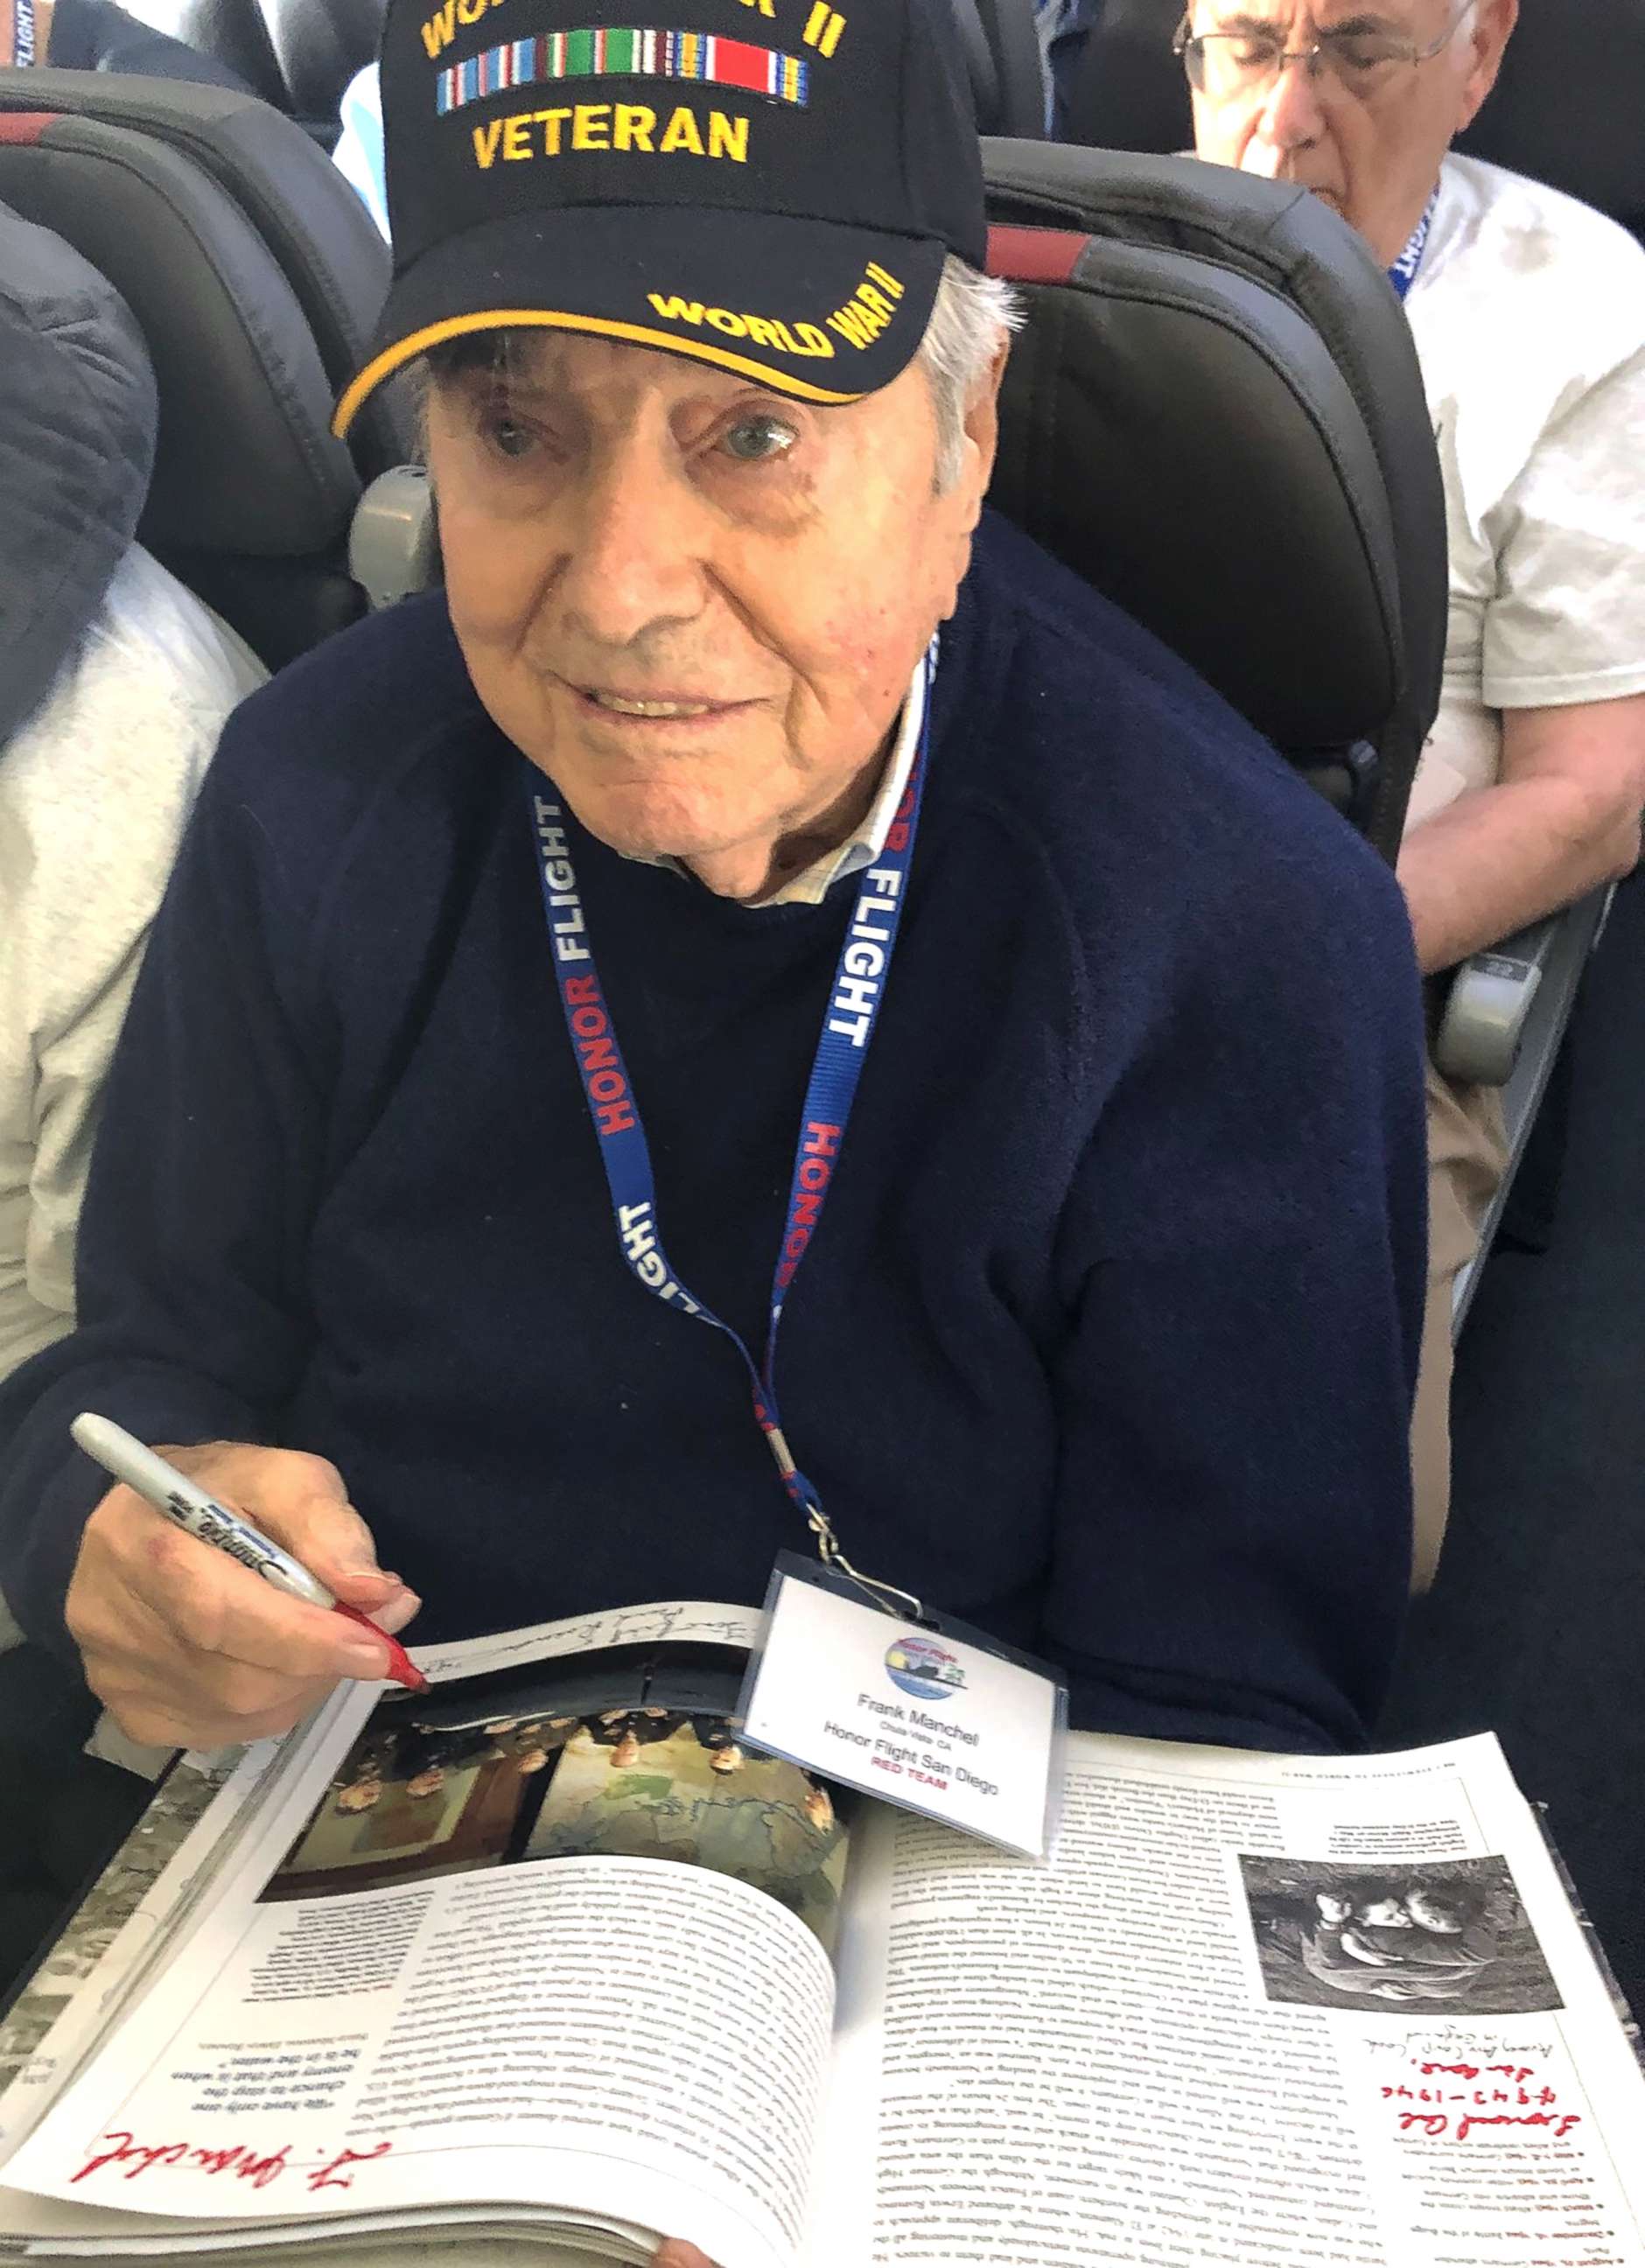 PHOTO: Frank Manchel is pictured in this photo posted by Honor Flight San Diego on Facebook.